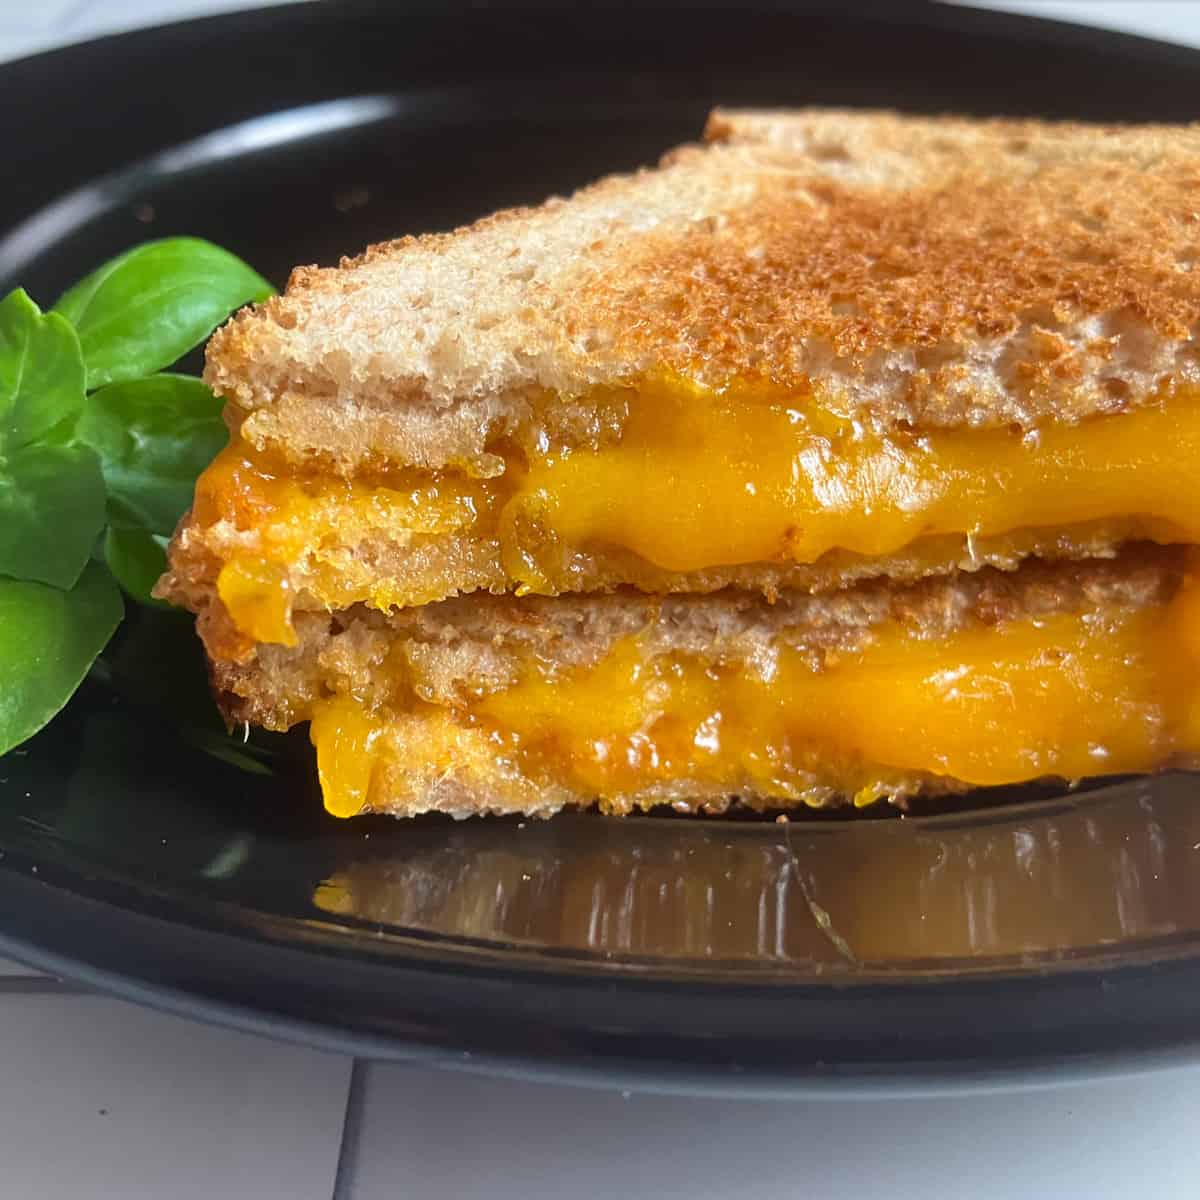 How to make grilled cheese in a toaster - Reviewed